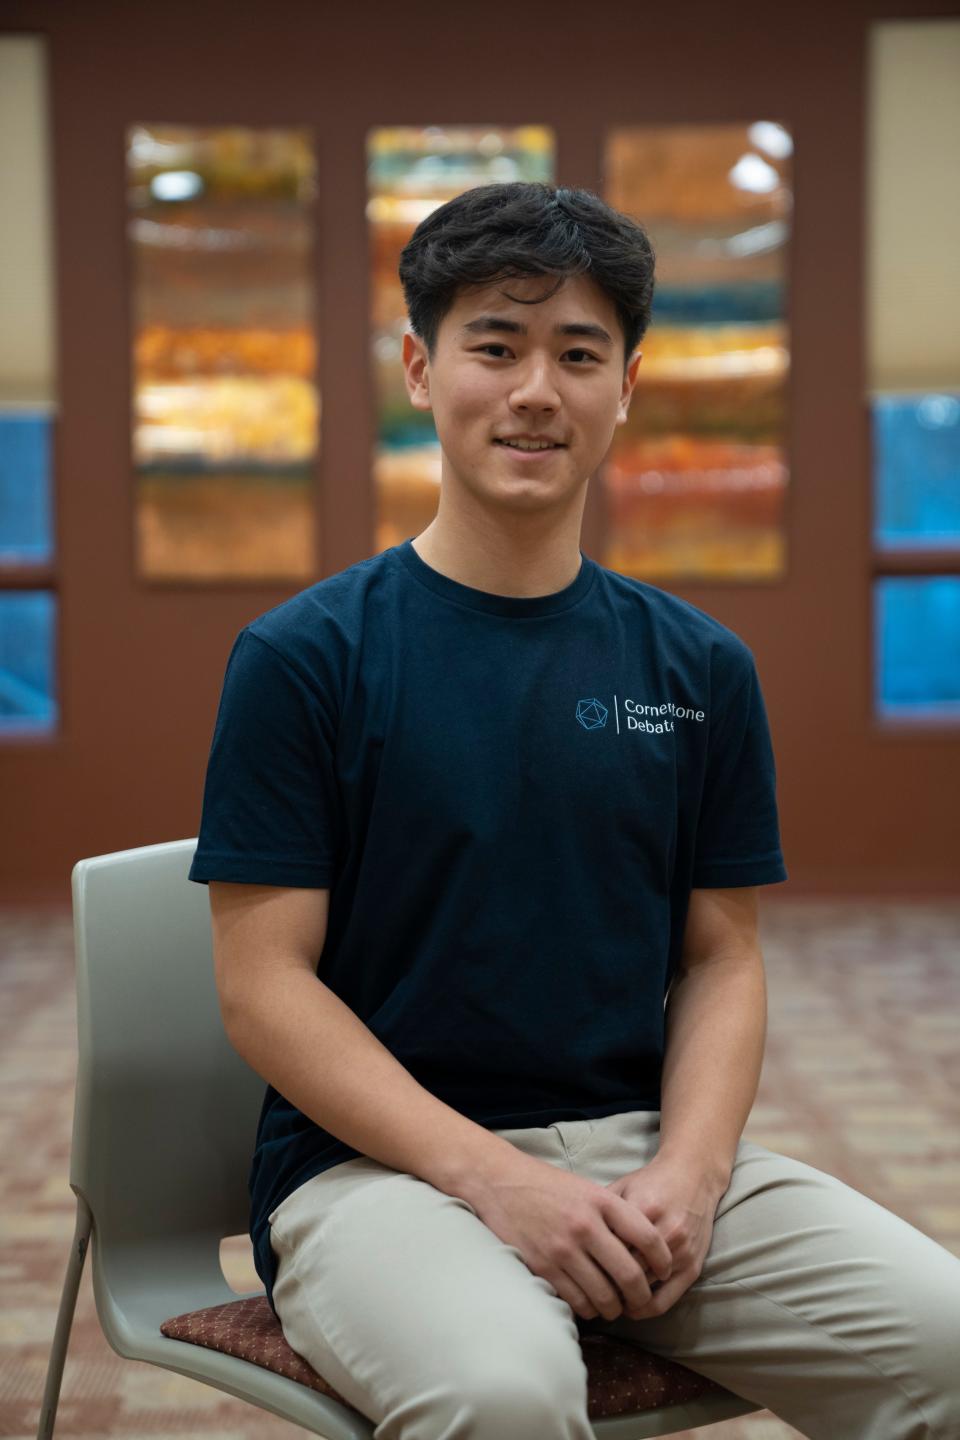 Dec 13, 2023; Closter, NJ, United States; Bergen County Academies student Andrew Chun is the founder and executive director of Cornerstone Debate, a nonprofit that provides instruction and materials about debating to middle school and high school students. Chun at Closter Public Library.